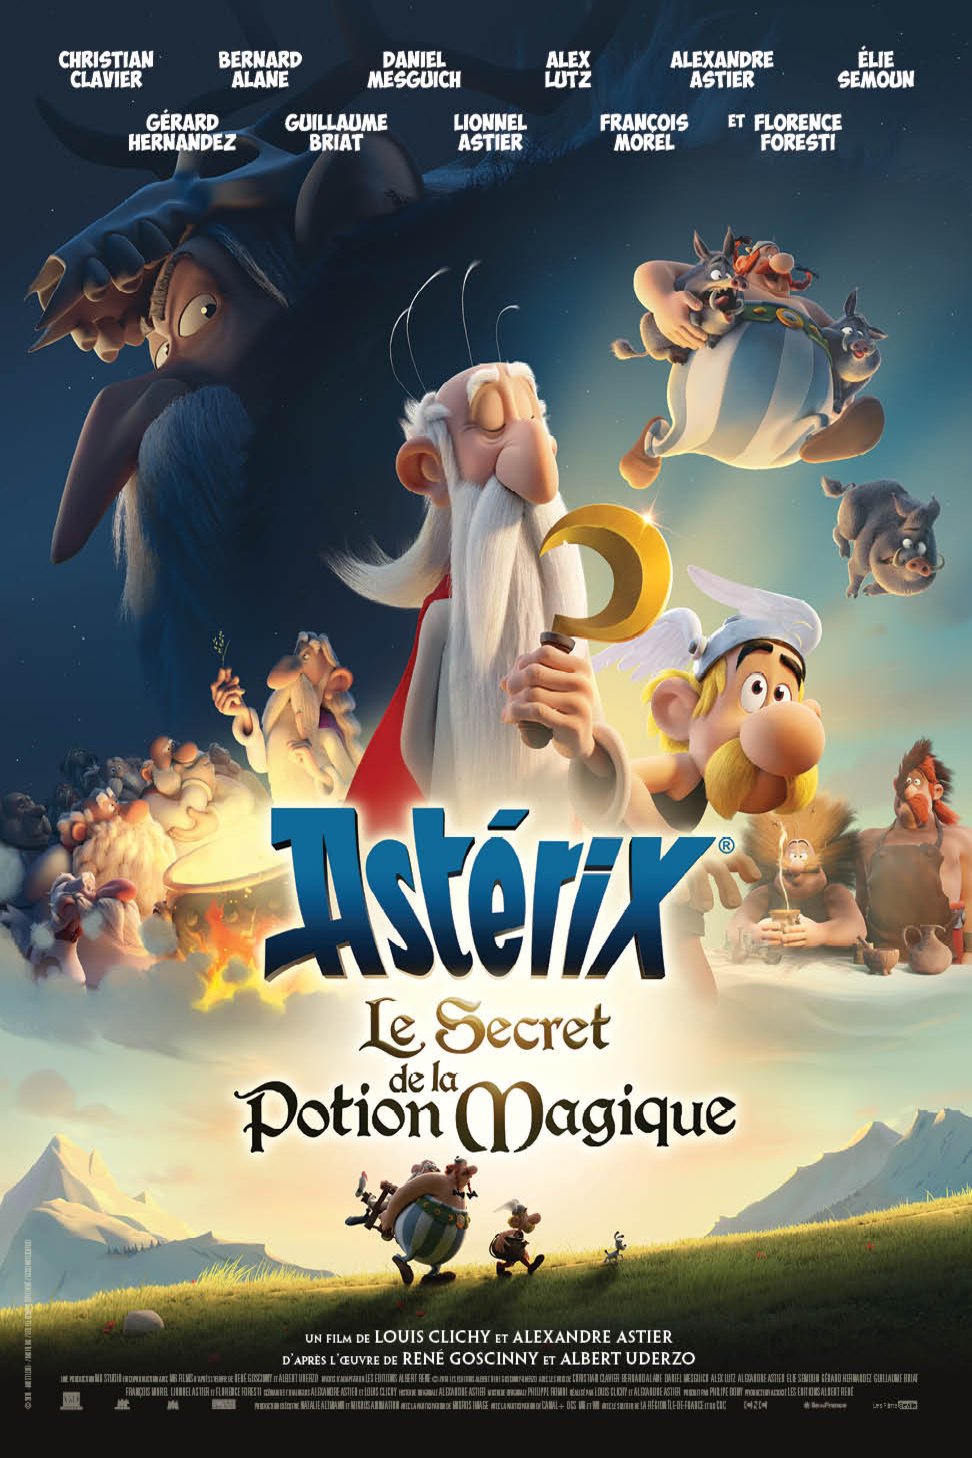 Poster of the movie Asterix: The Secret of the Magic Potion